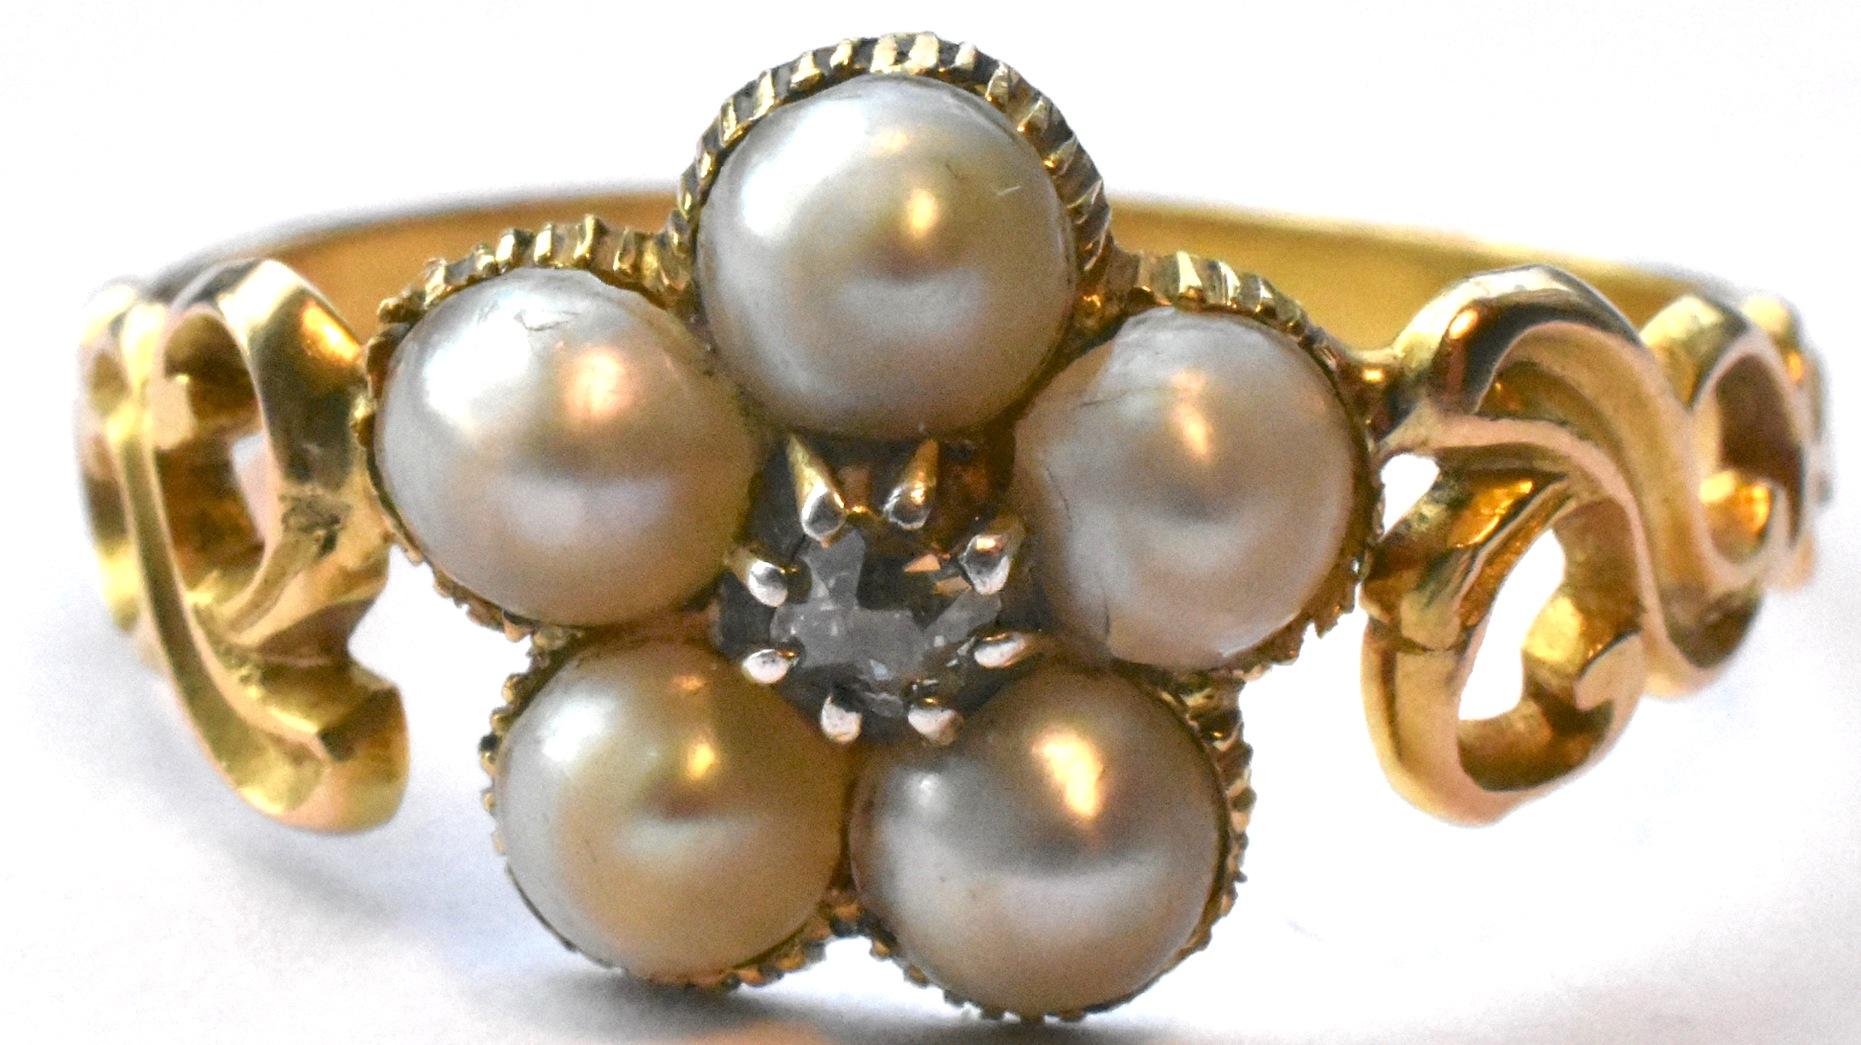 A Georgian period 18K cluster ring in the form of a daisy with 5 seed pearls and a single cushion cut diamond at the center. Incised designs along the band and whirls at the shoulders adorn this ring. It looks as though there may have been a locket